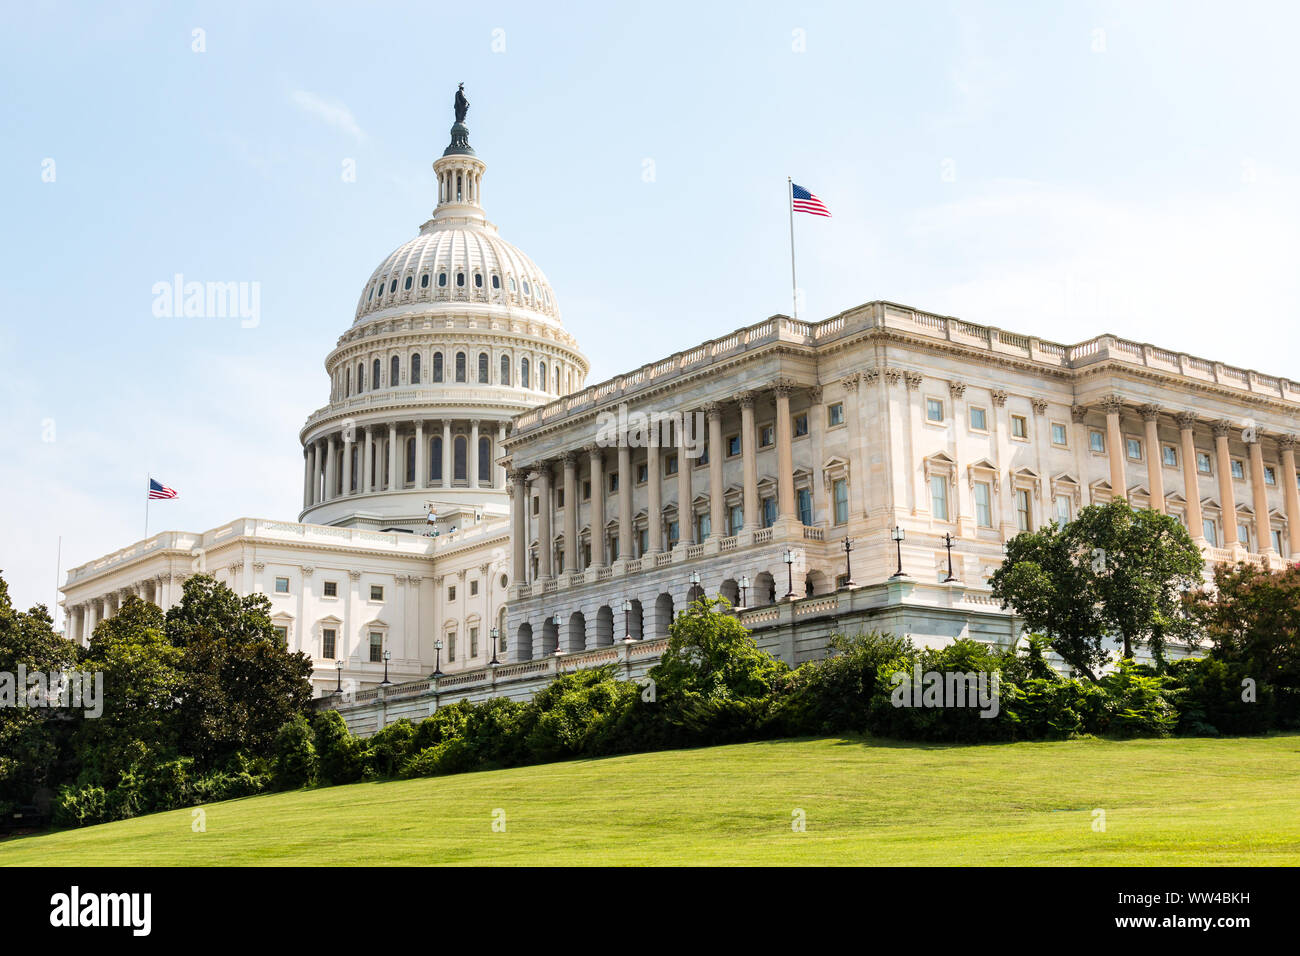 The U.S. Capitol Building, one of the most recognizable buildings in the world, and the home of Congress in Washington, D.C. Stock Photo